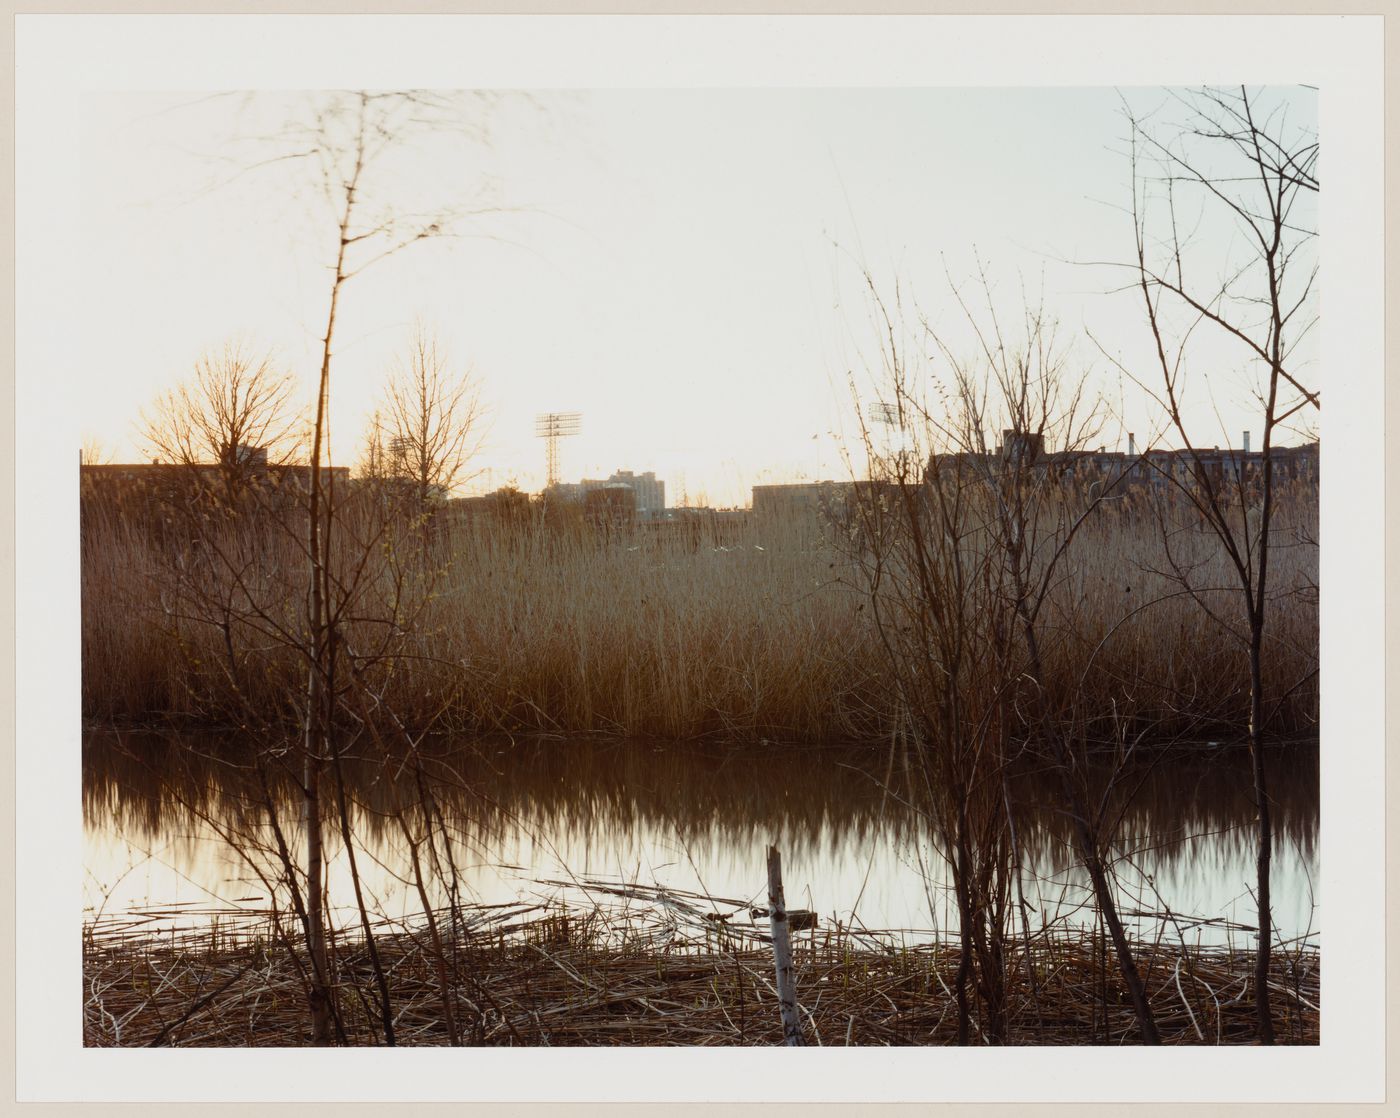 Viewing Olmsted: View of The Back Bay Fens, Boston, Massachusetts